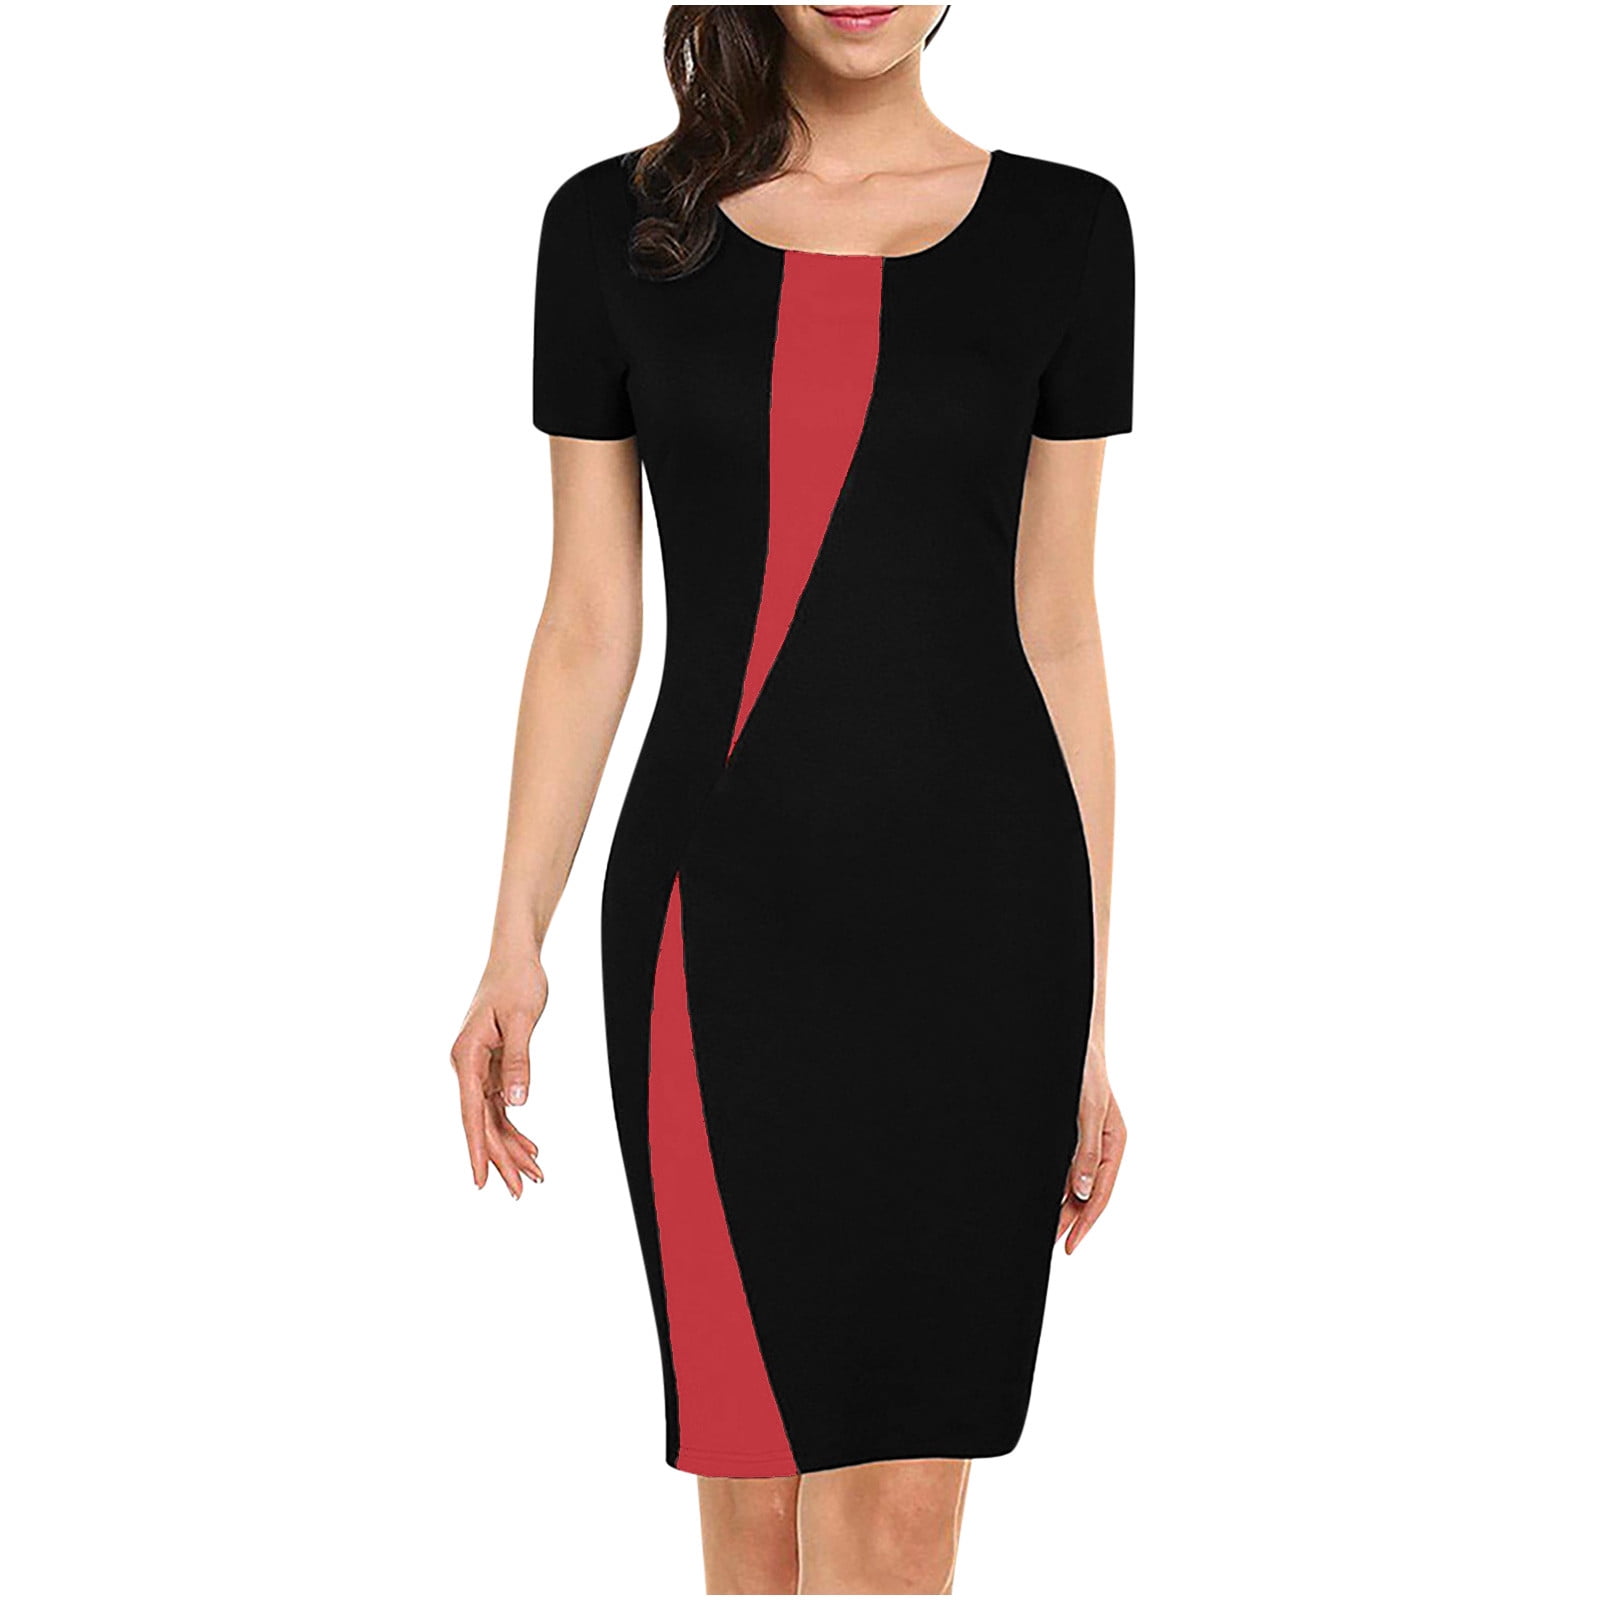 Knee Length Elegant Womens Pencil Dress for Work Office and Business OL  Style | eBay